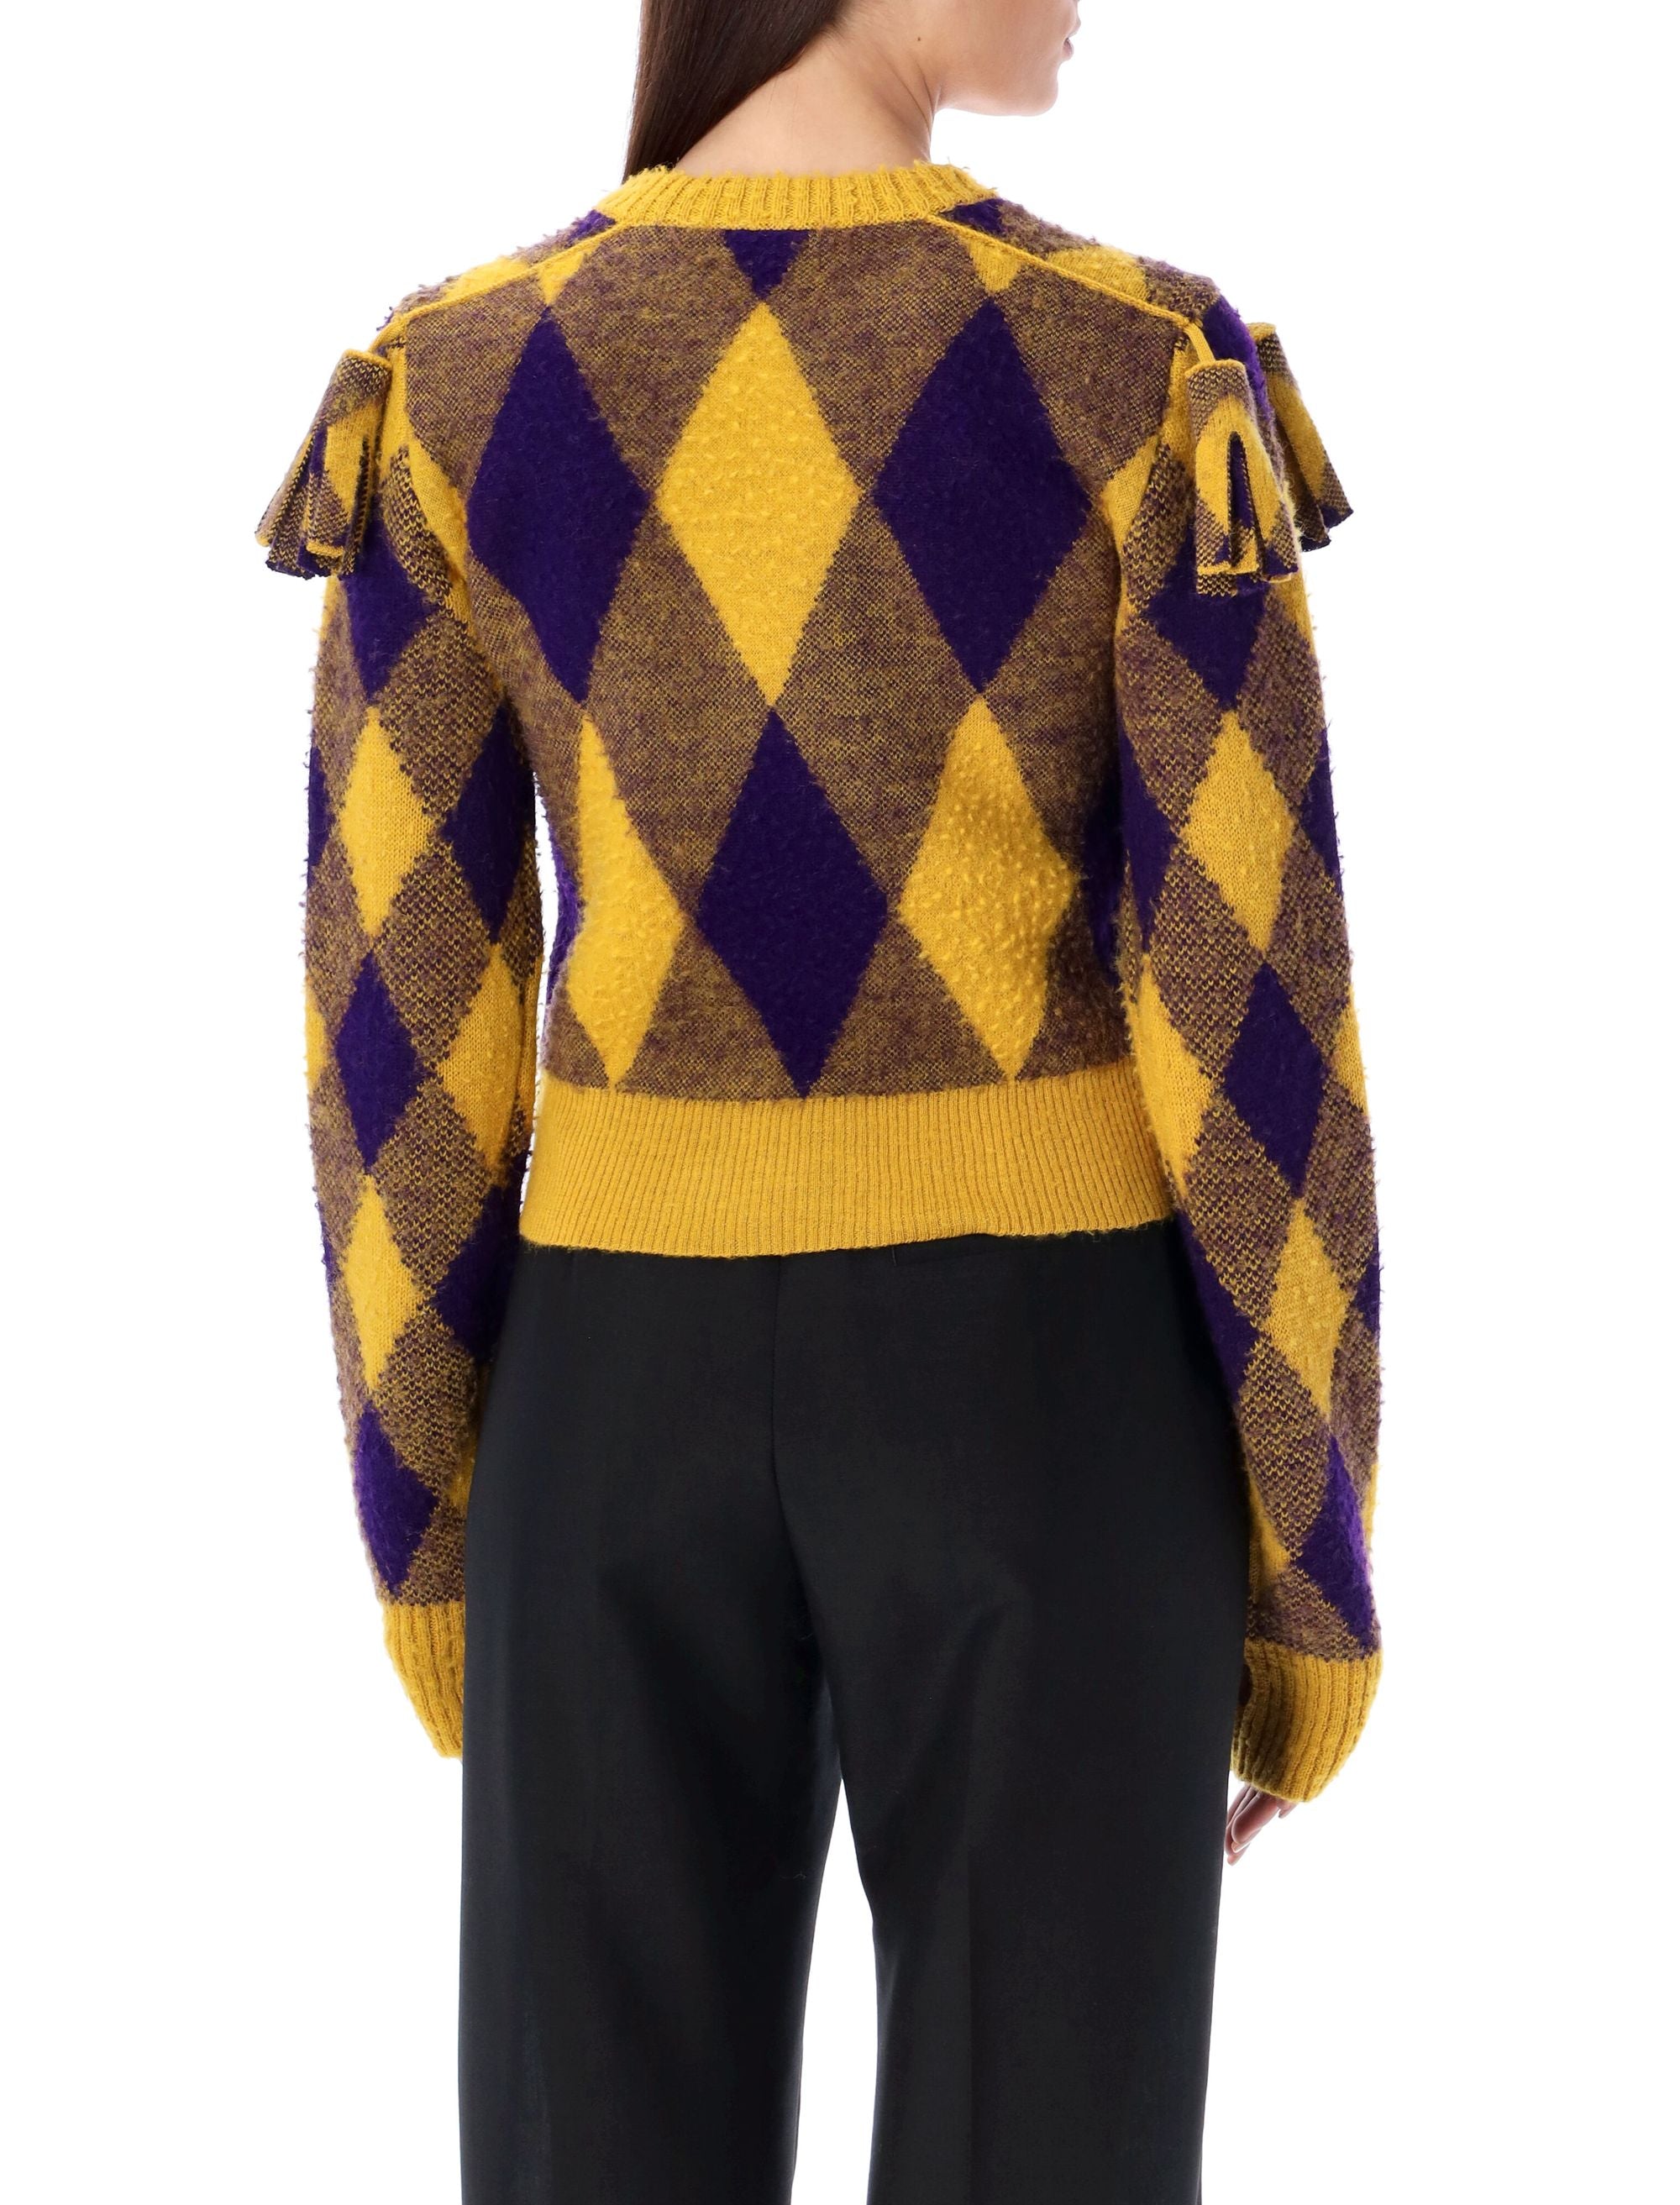 Shop Burberry Warm And Chic: Women's Argyle Wool Sweater In Yellow